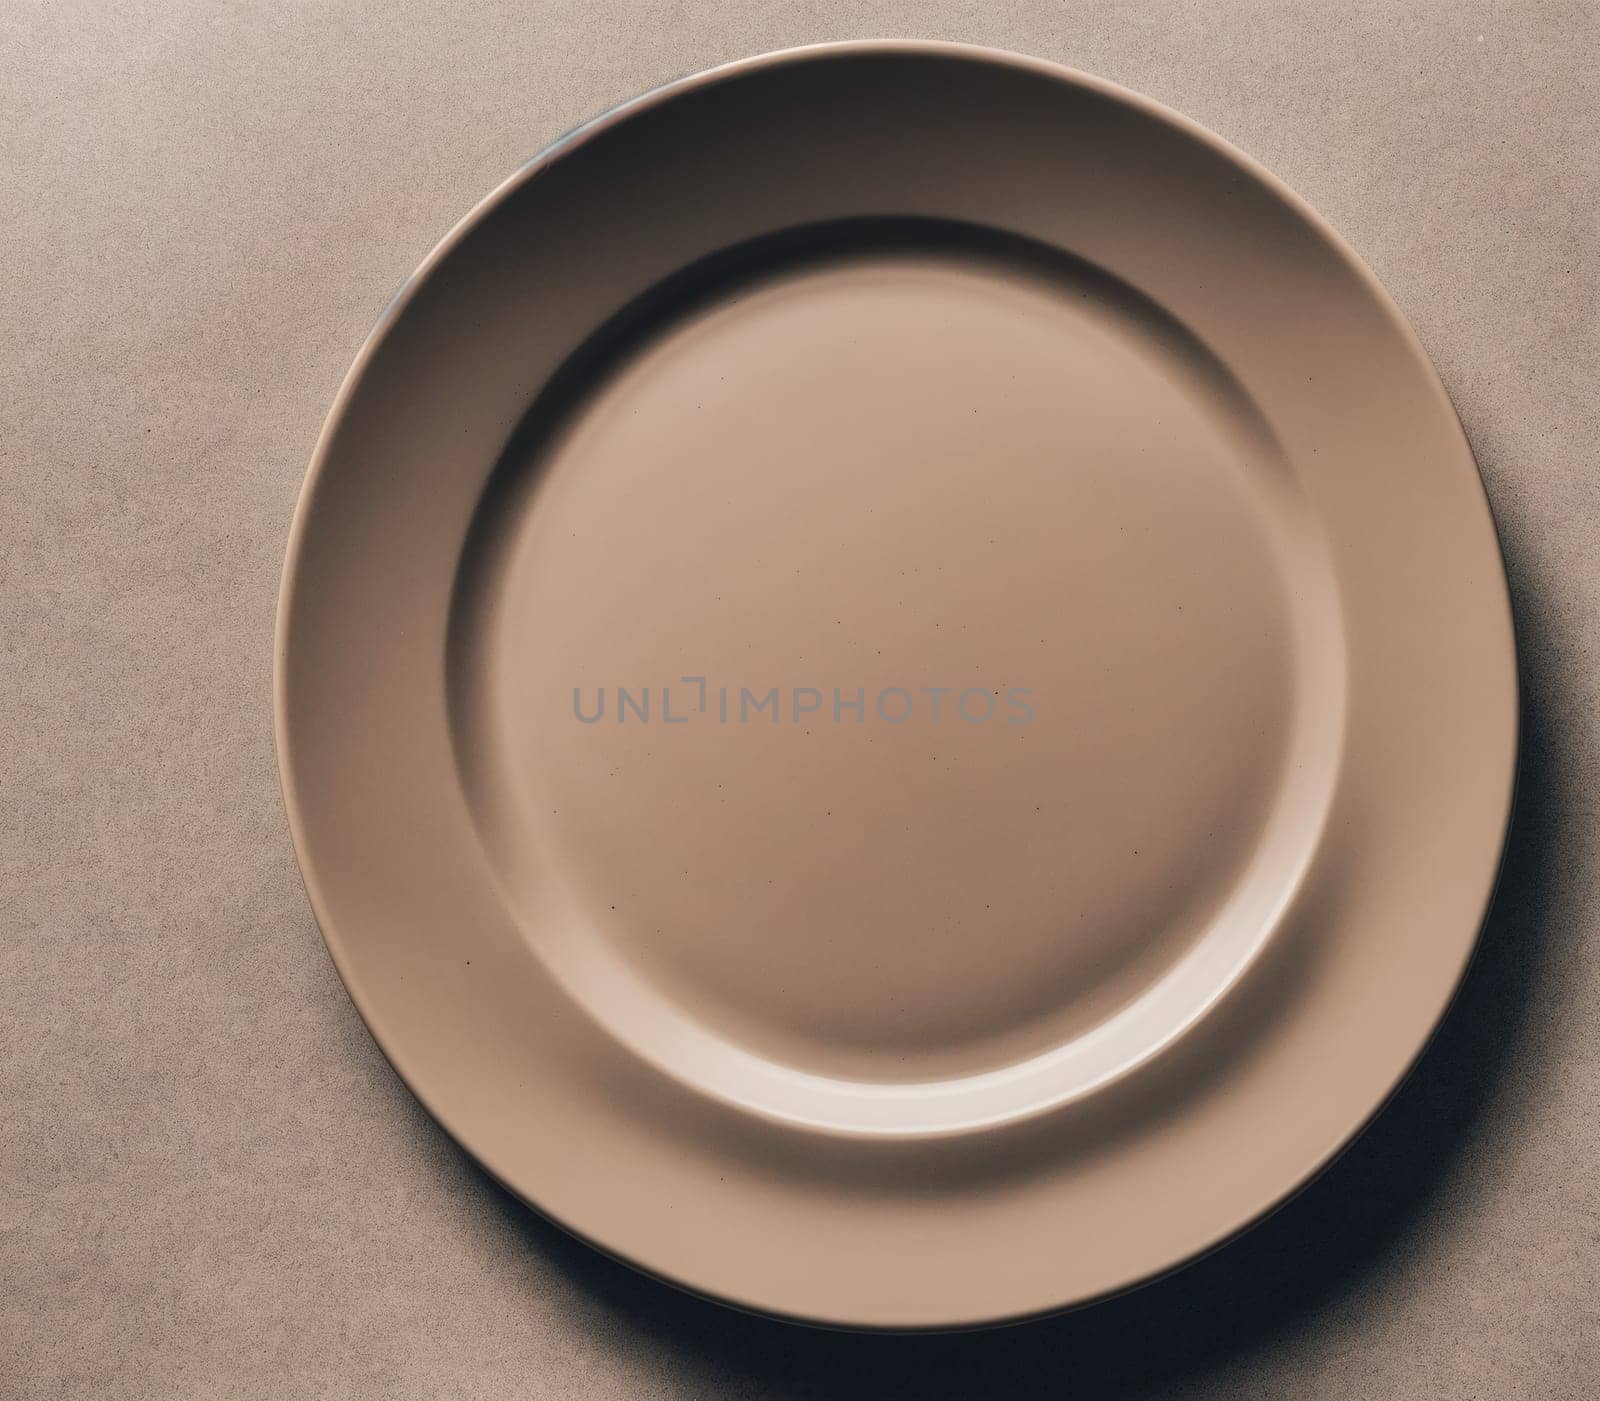 The image is a plate with a white background and no objects on it.